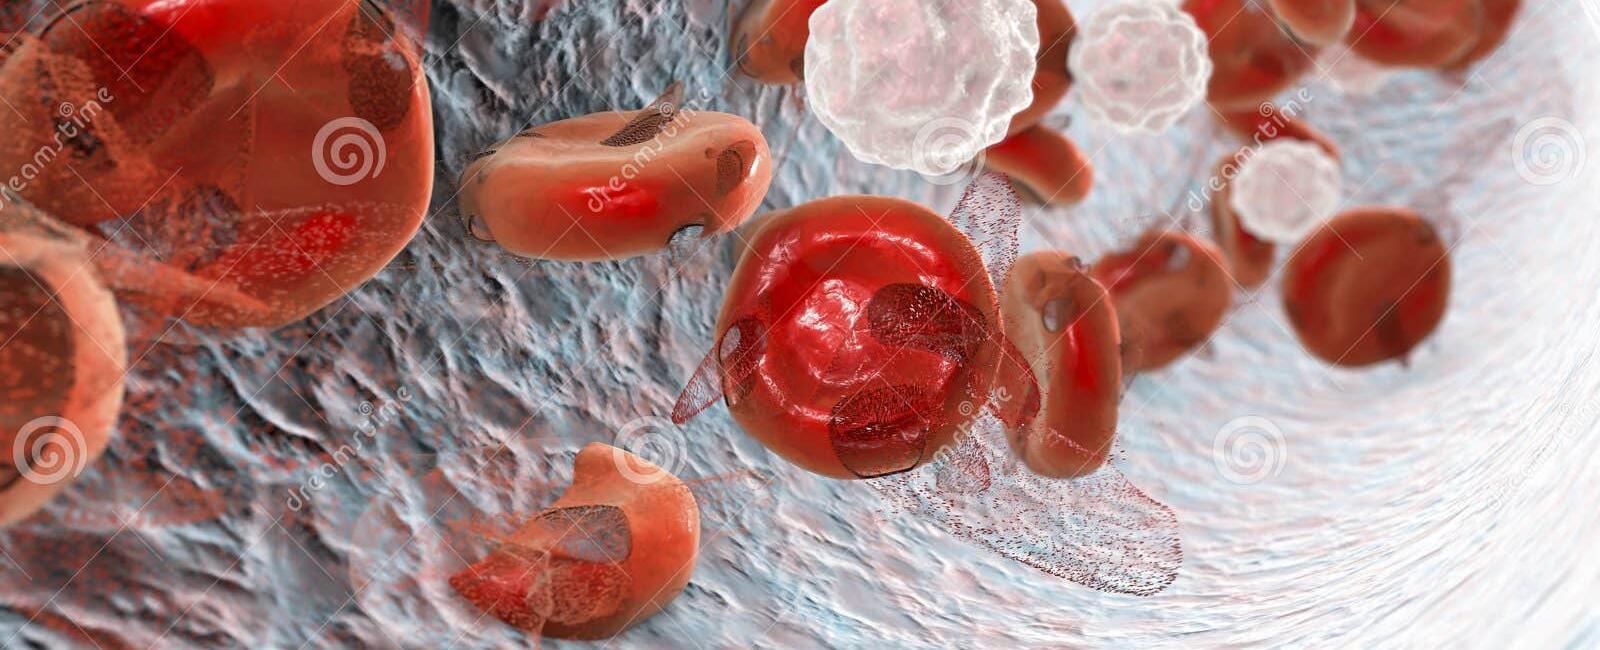 15 million blood cells are destroyed in the human body every second